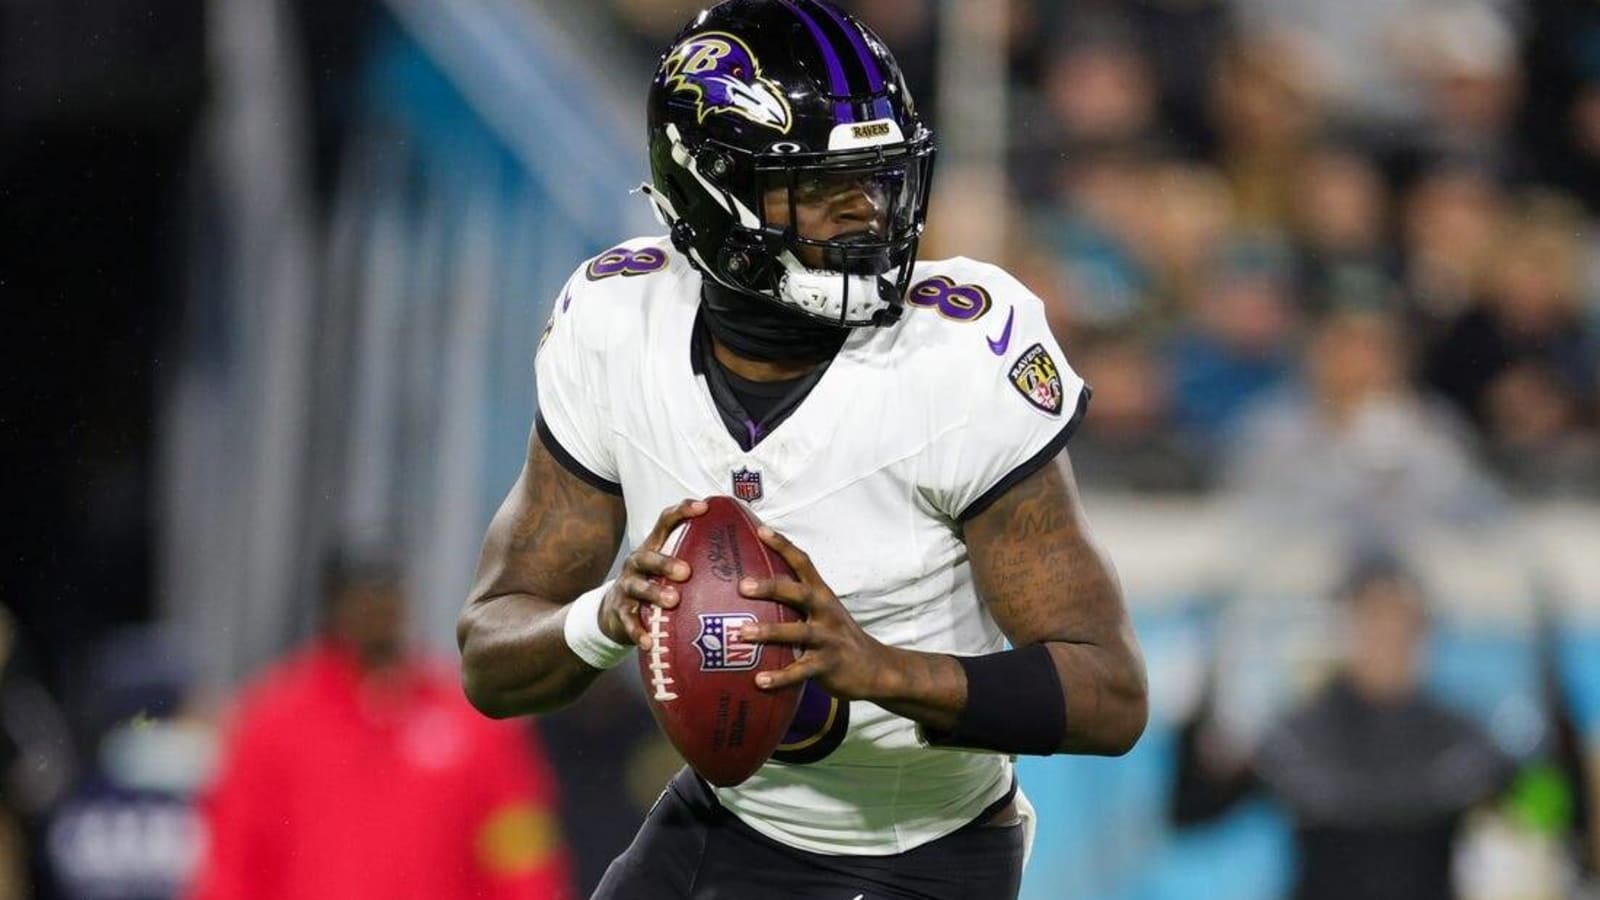 Ravens down Jaguars, punch ticket to playoffs